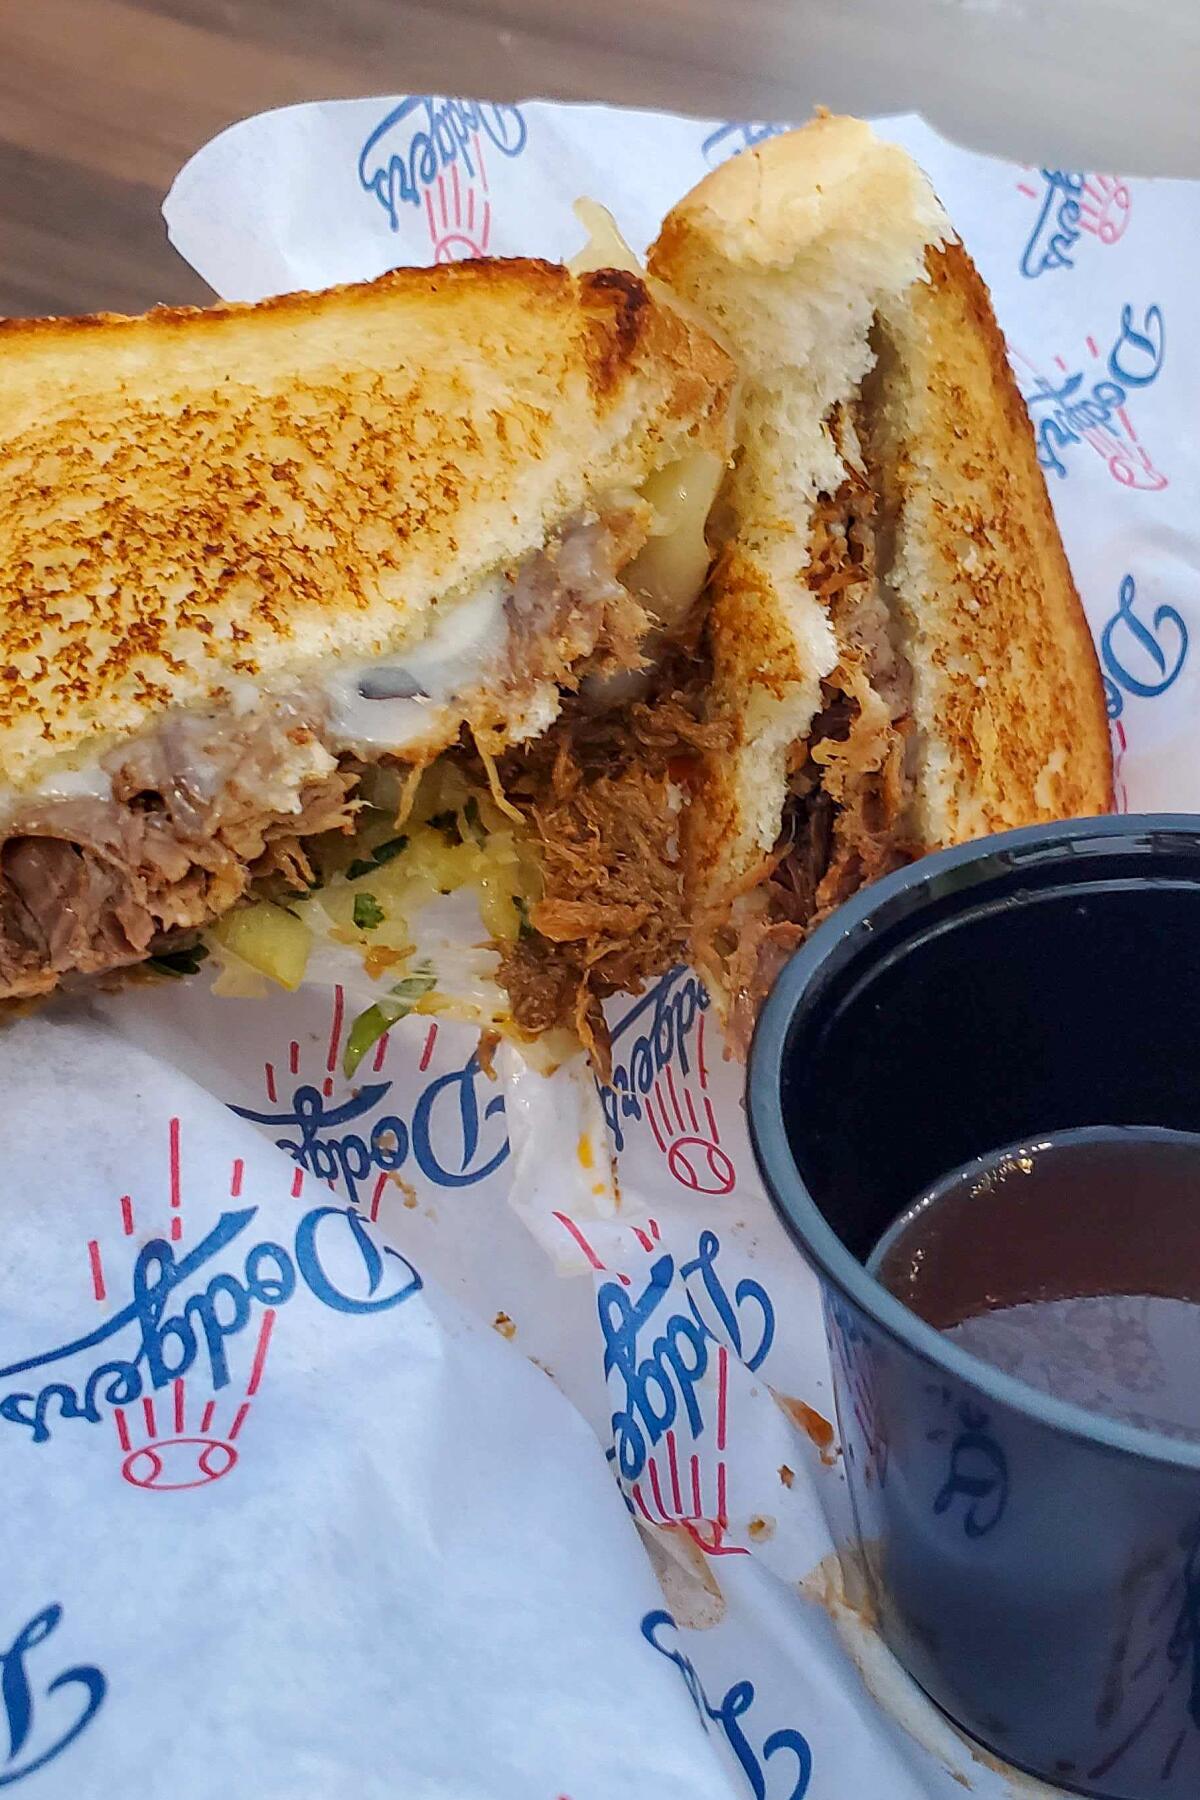 The new birria grilled cheese at Dodger Stadium served with a cup of consommé.